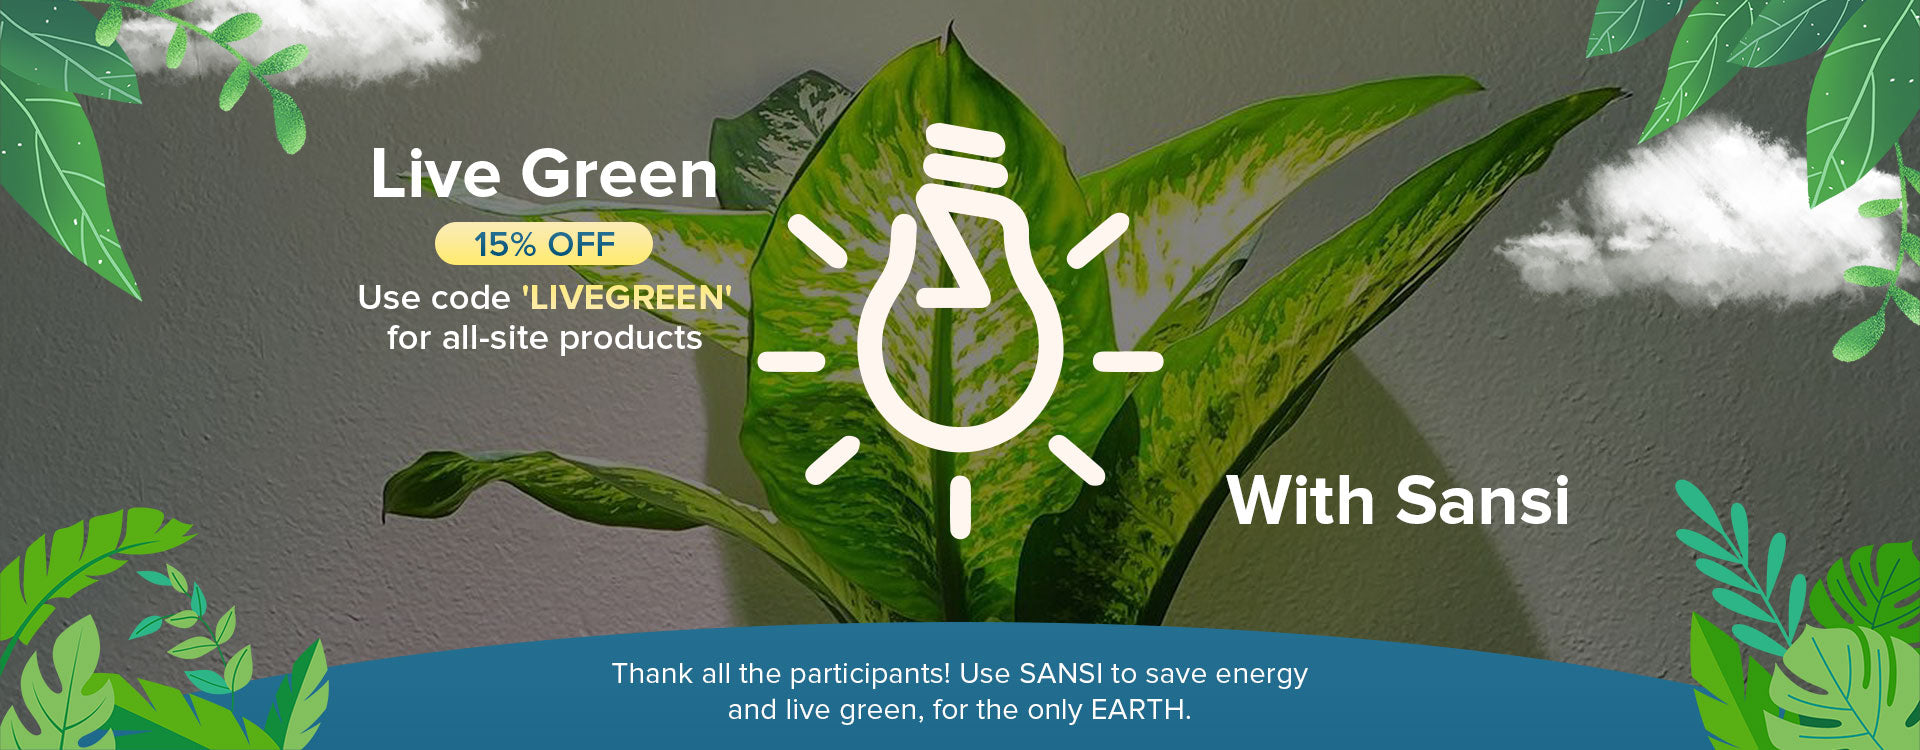 #Live Green With Sansi,Upload your plants' photos and get a chance to get $150.